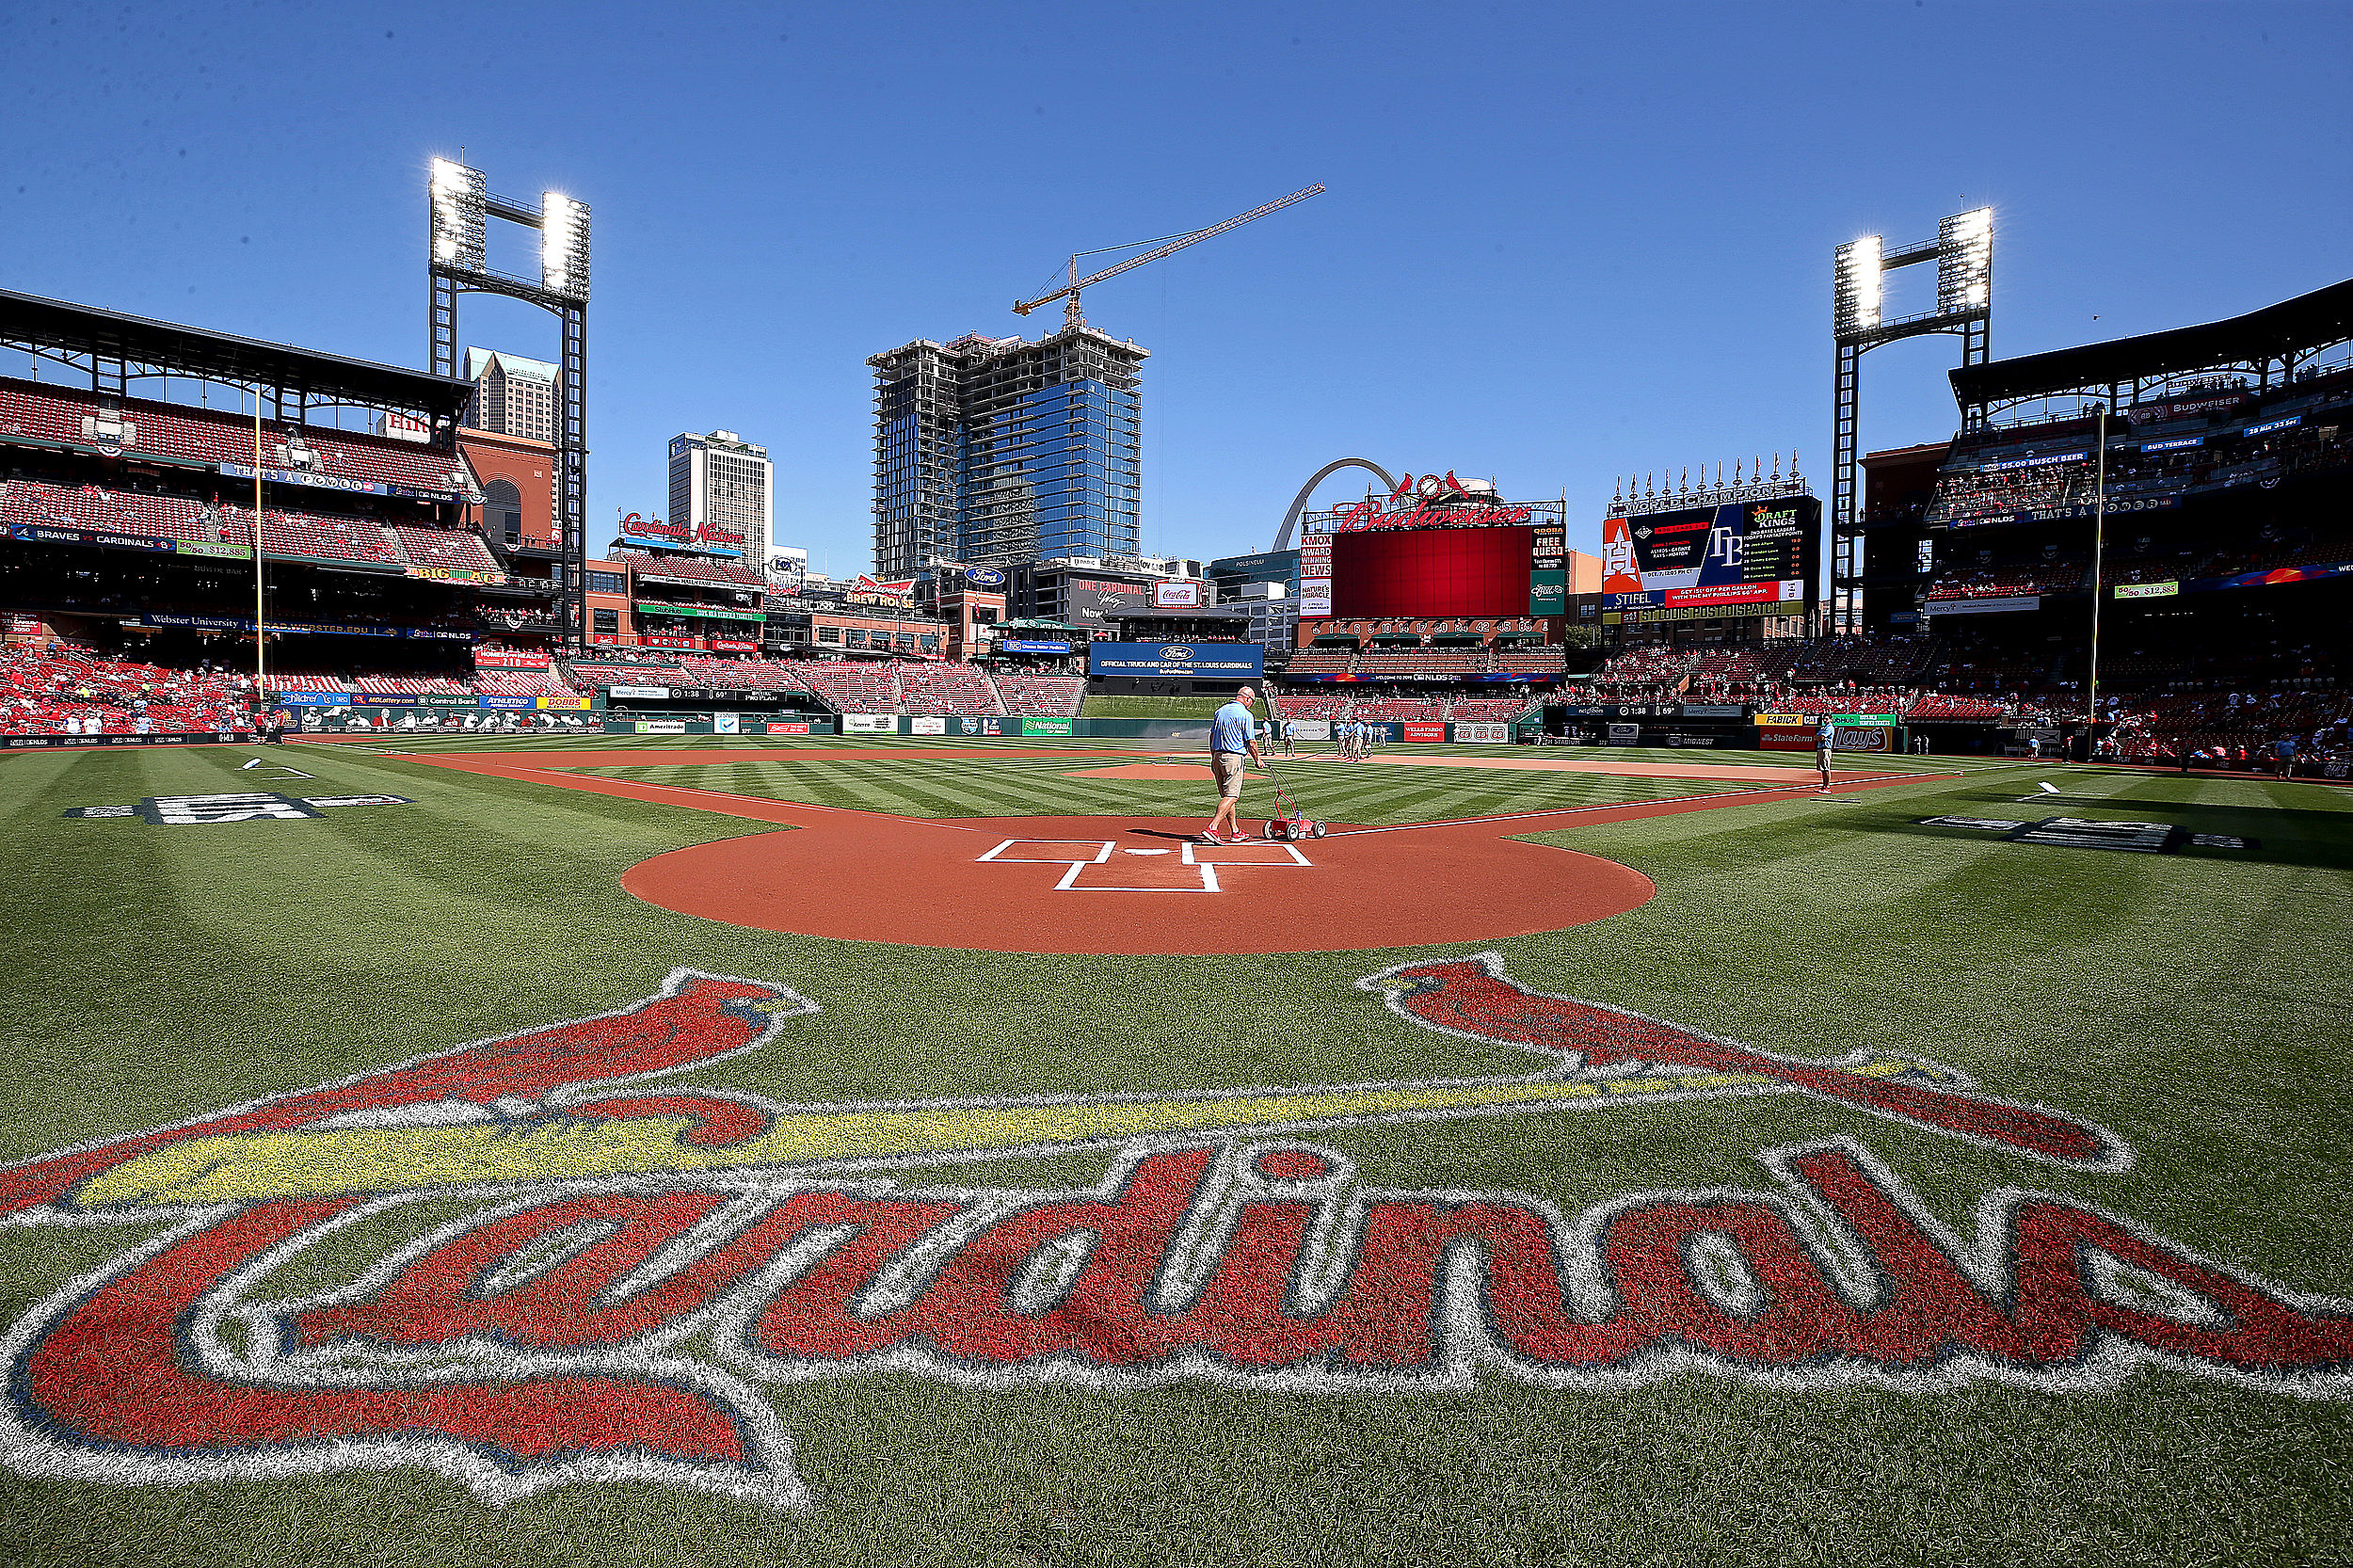 Cardinals play the Royals in an exhibition game at Busch Stadium today   FOX 2